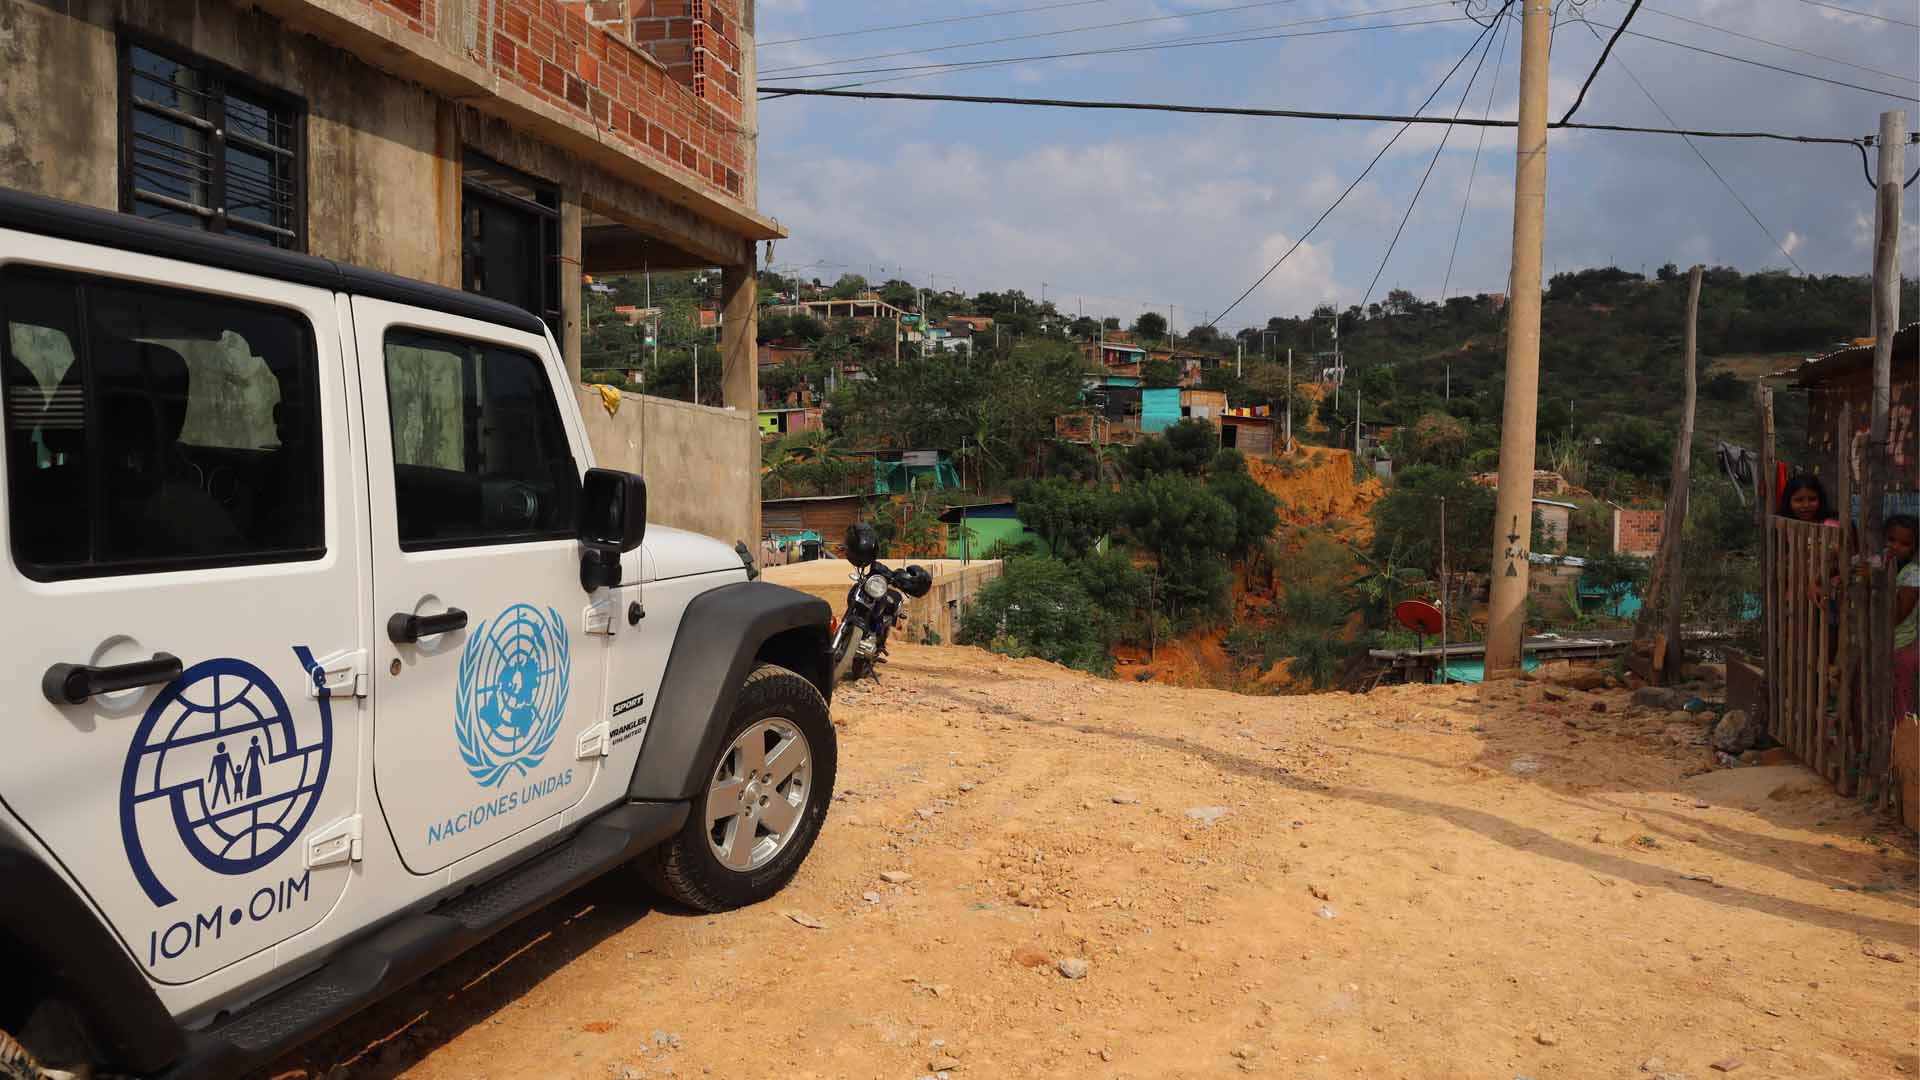 A car from the International Migration Organization is parked in front of a house in the Alfonso Gómez settlement.